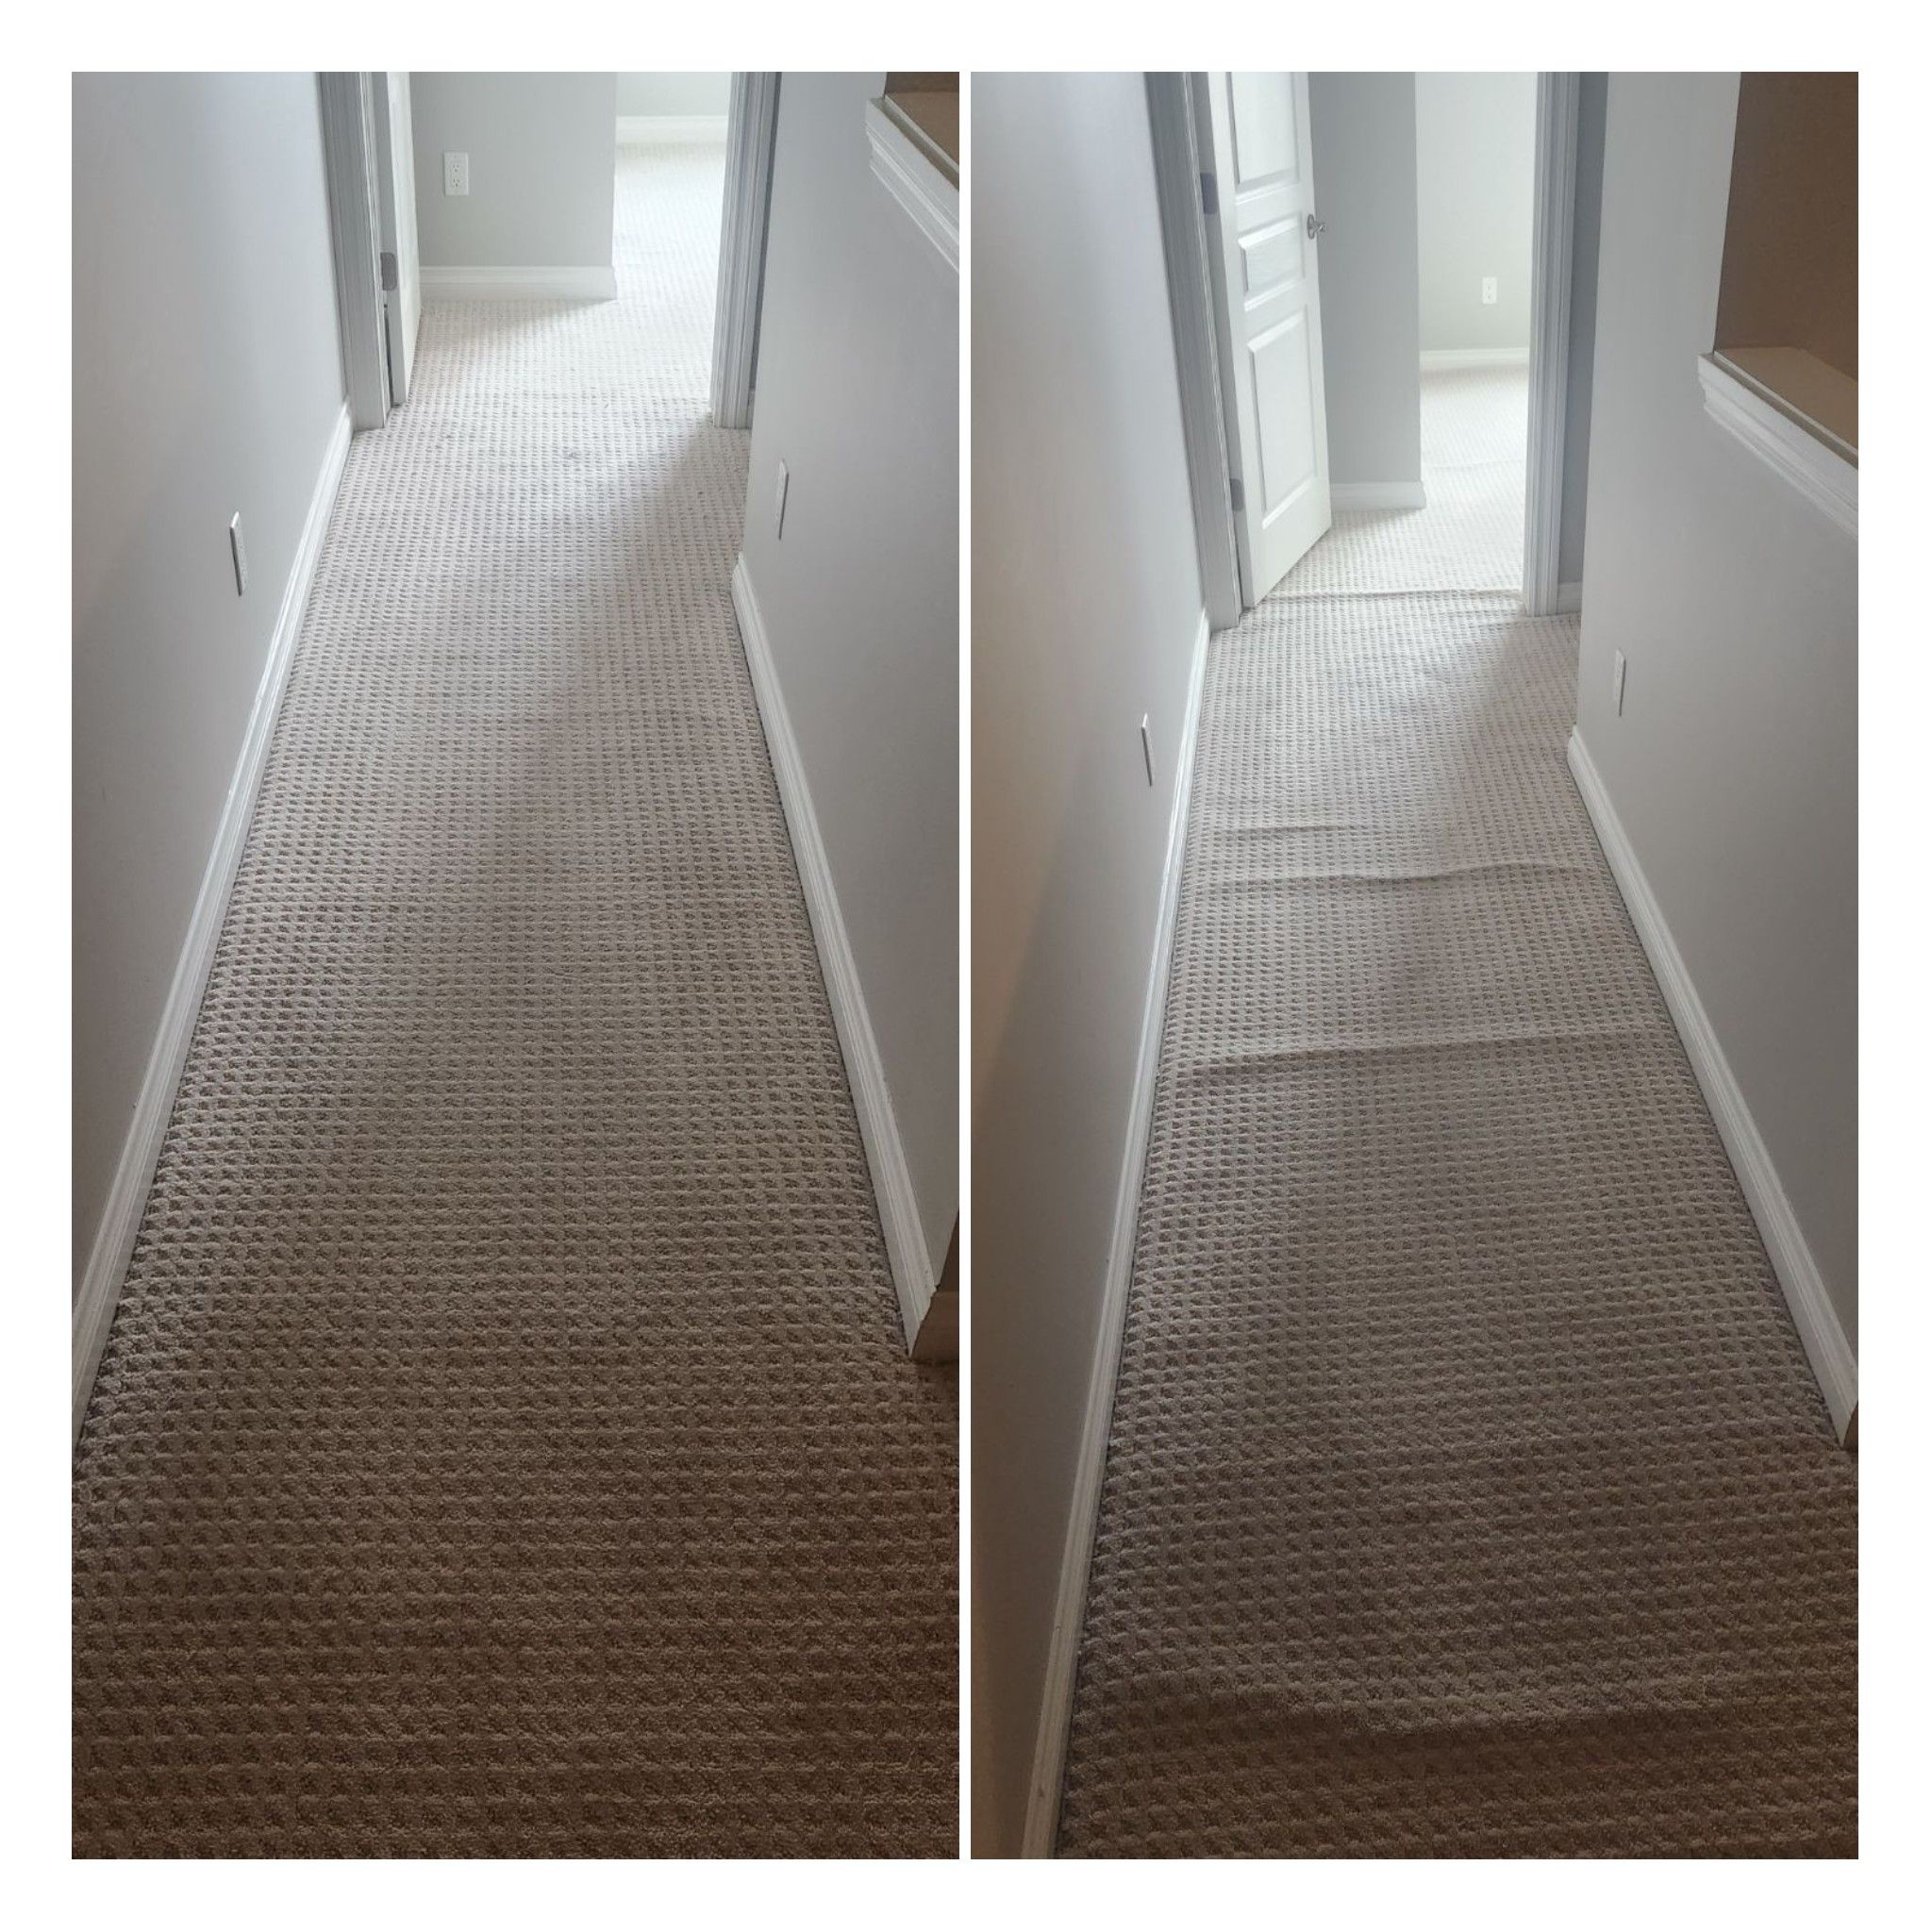 Carpet Restretching for Cut a Rug Flooring Installation in Lake Orion, MI